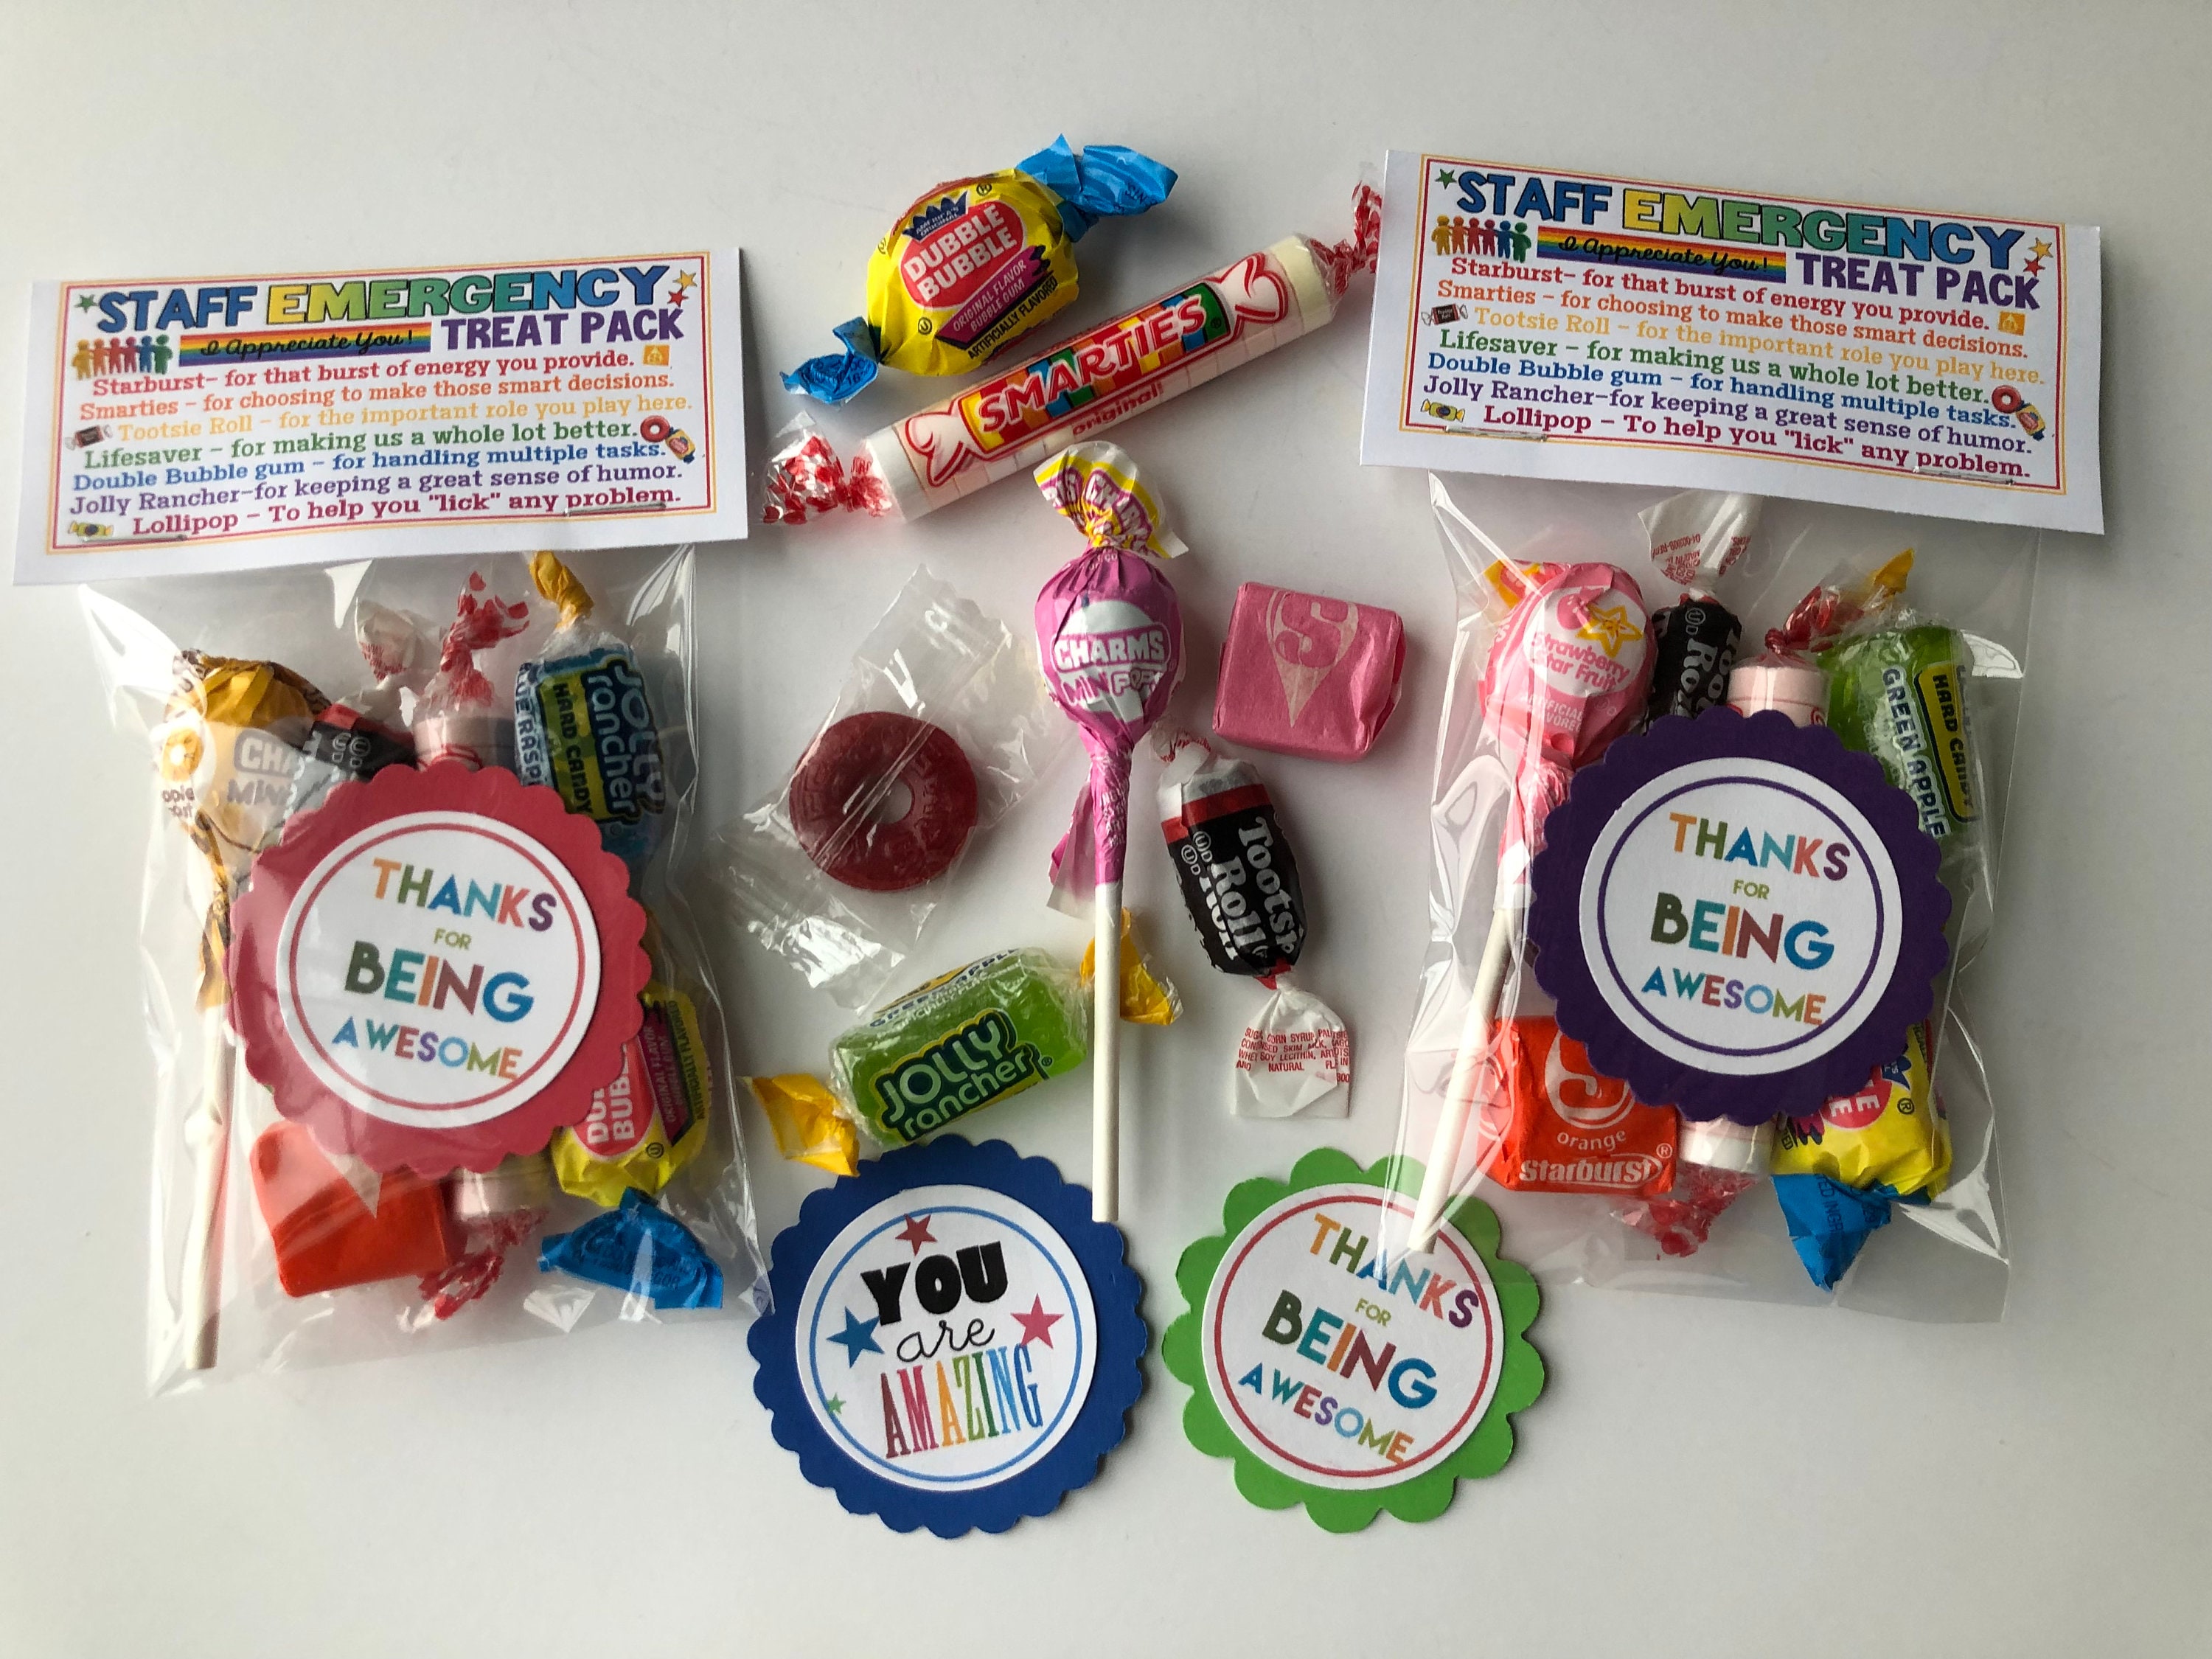 STAFF Emergency Treat Pack sweet Thoughts Goody Bag, Happy Birthday,  Friends, Co-workers, Secretary, Have a Great Day, Smile, Funny GAG Bag 